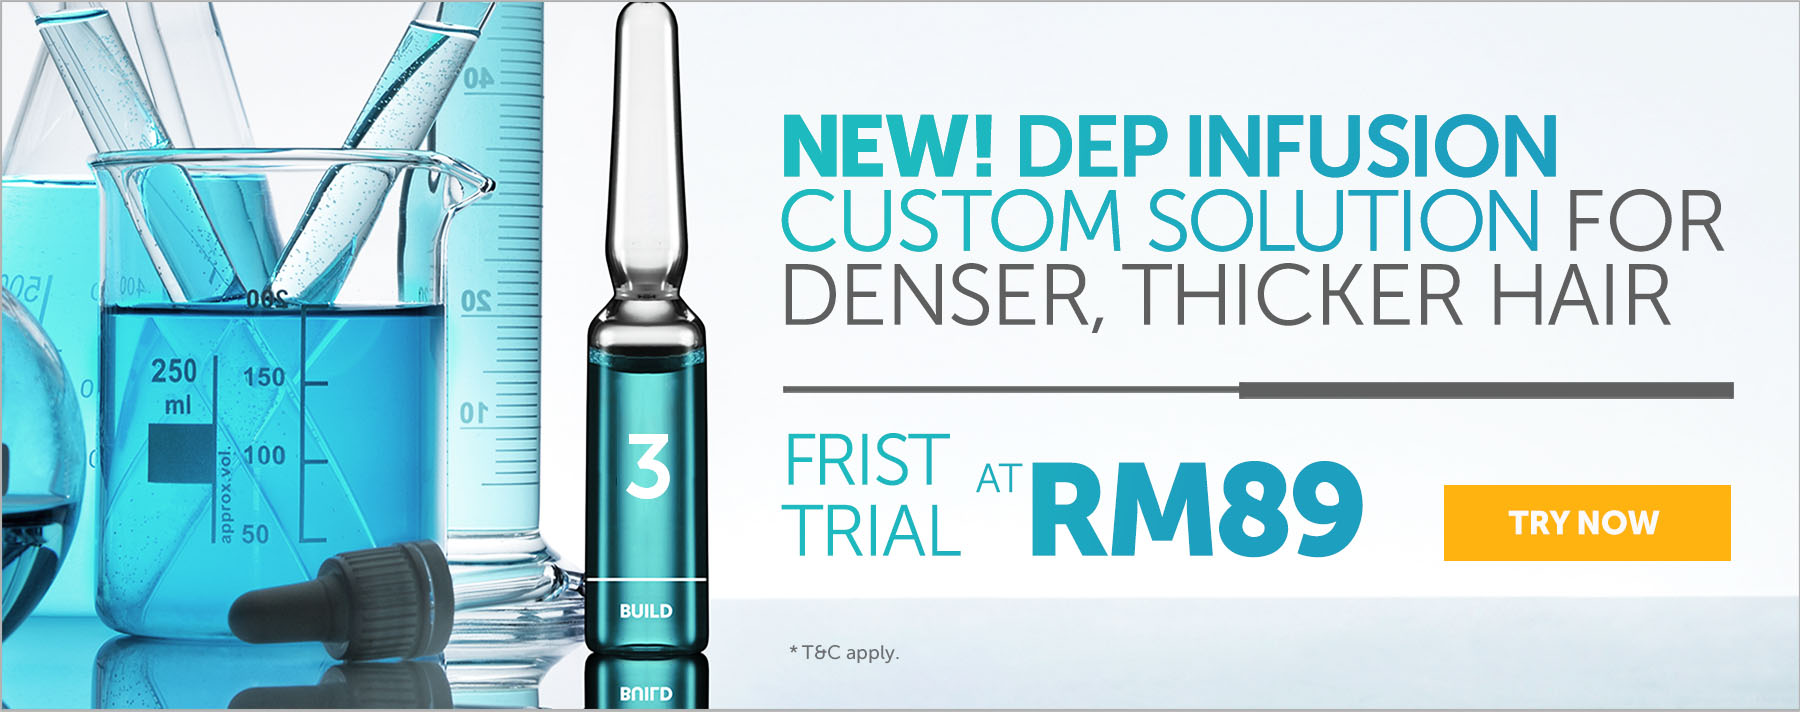 NEW! DEP INFUSION Custom Solution for Denser, Thicker Hair